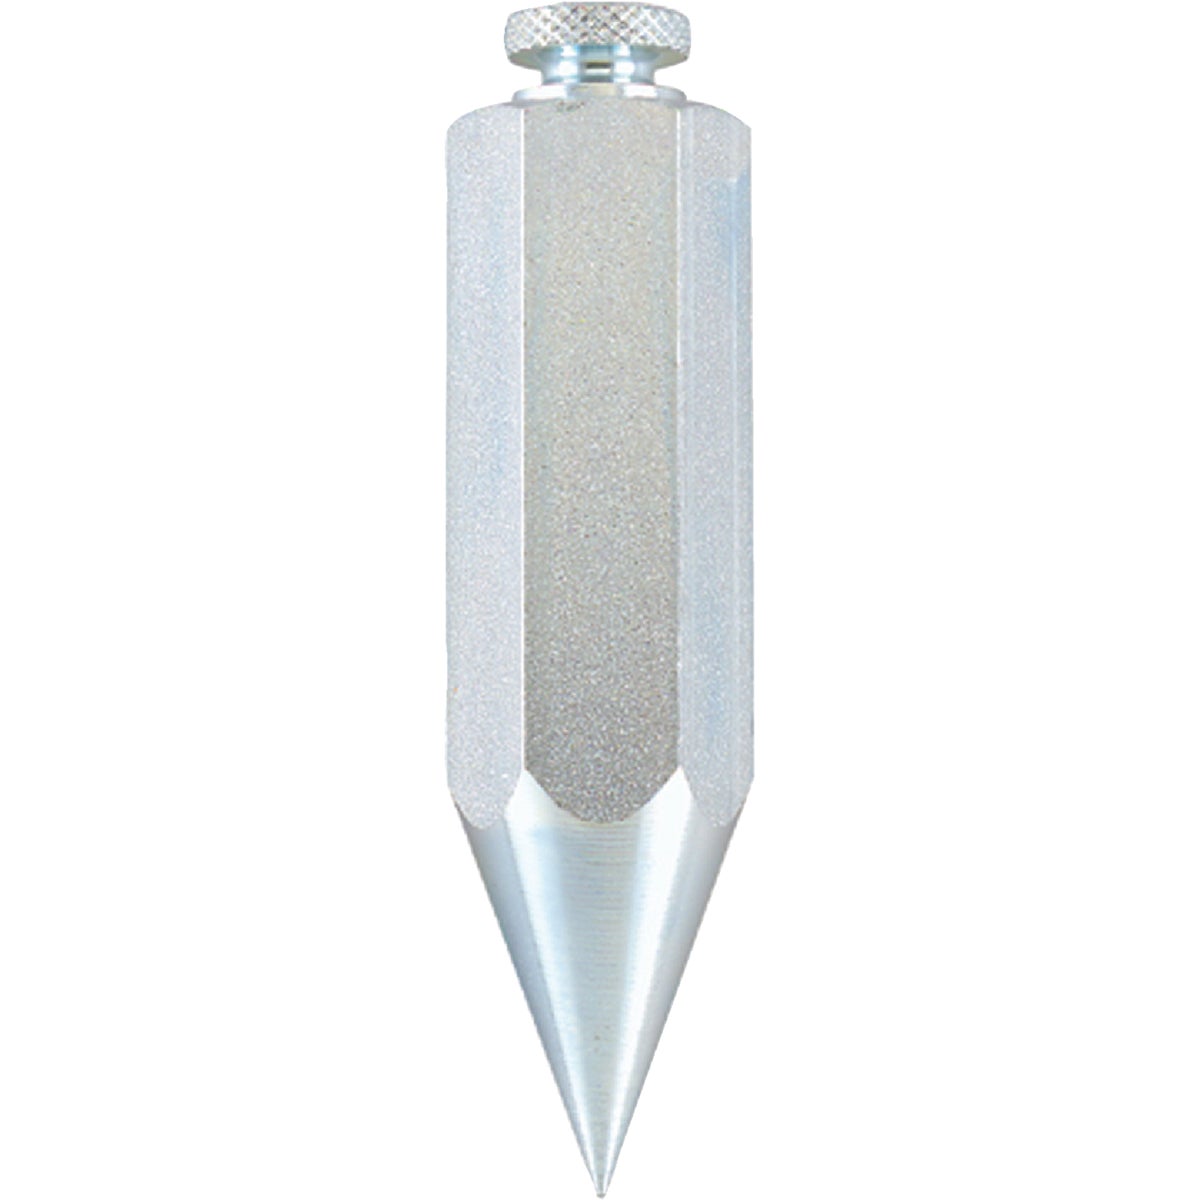 Item 344960, Find plumb quickly and easily with Johnson's steel plumb bobs.